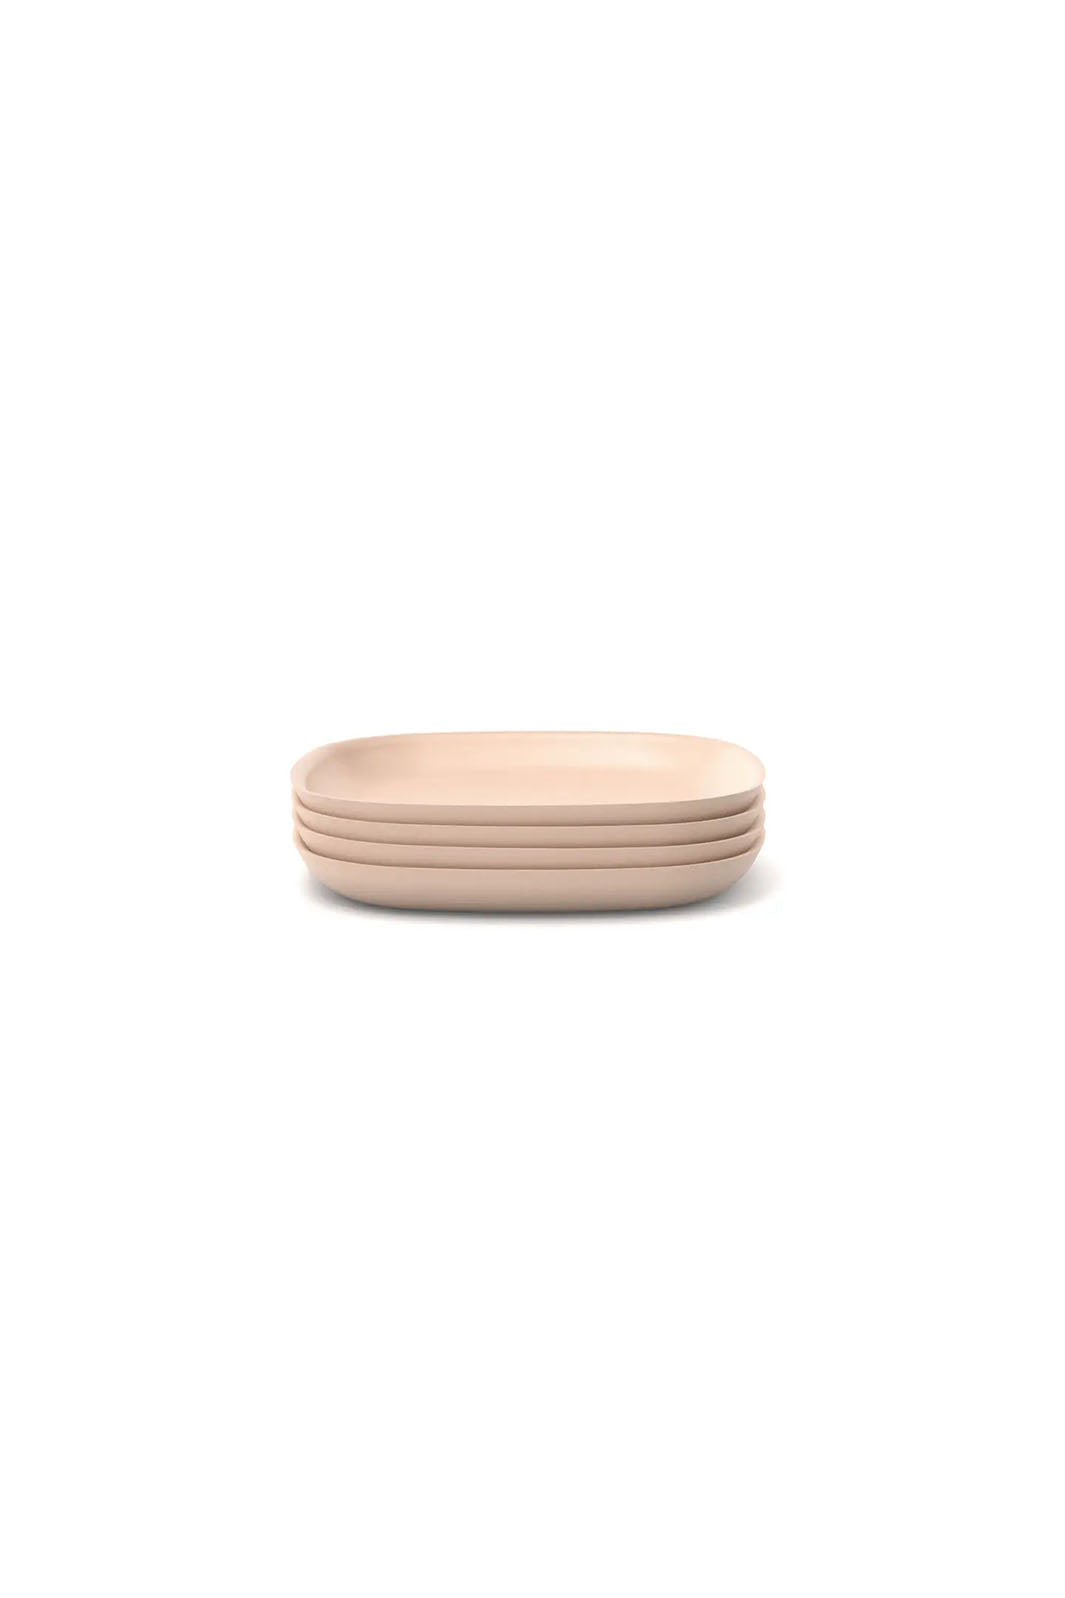 Bamboo Side Plate, 1 pc